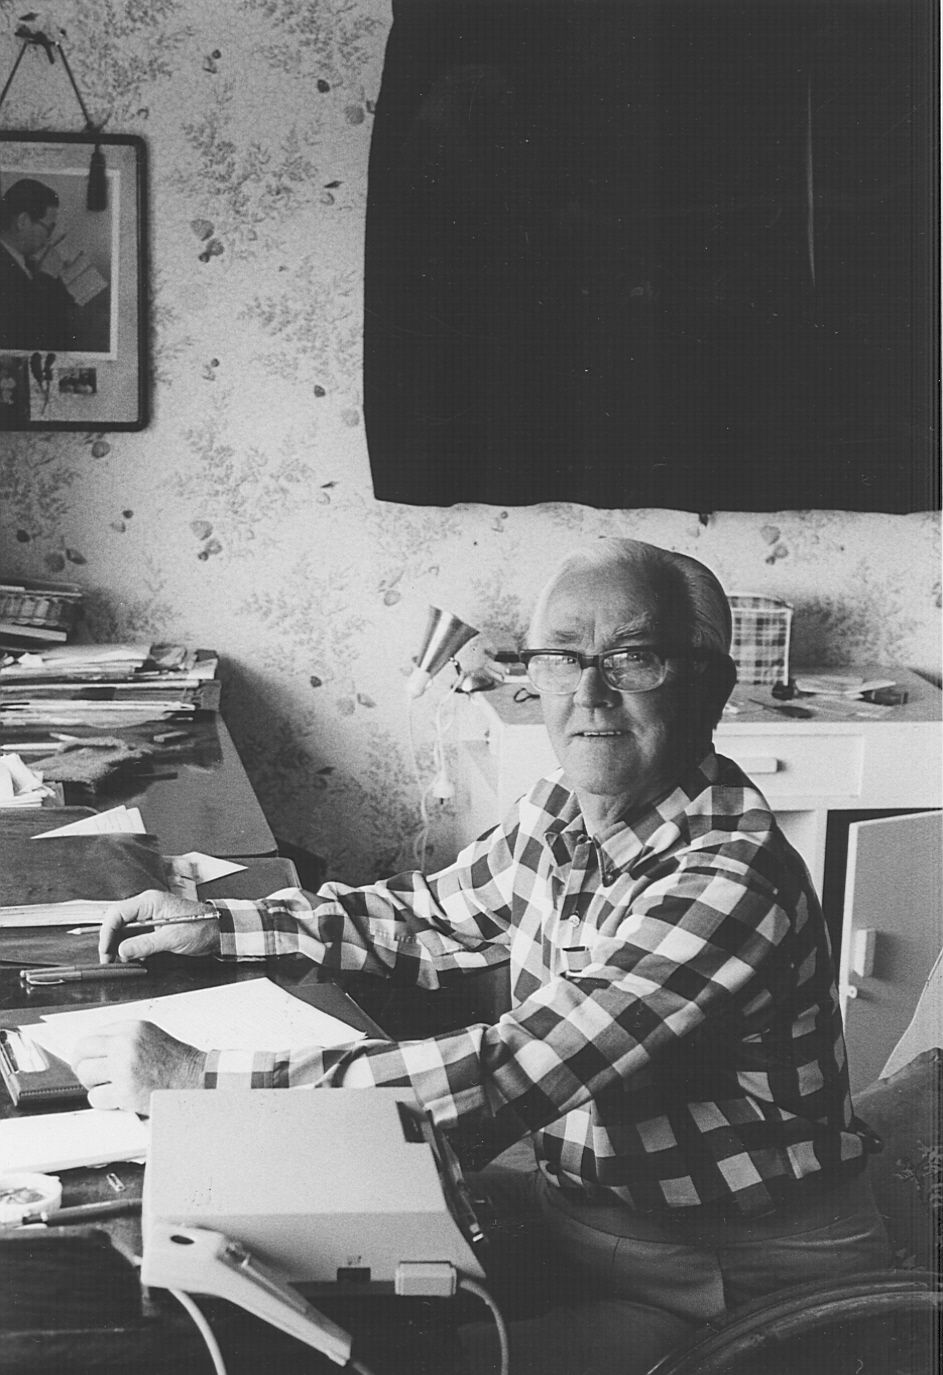 Sir Fletcher working on his autobiography, 1975. Photo: Jones Family Collection